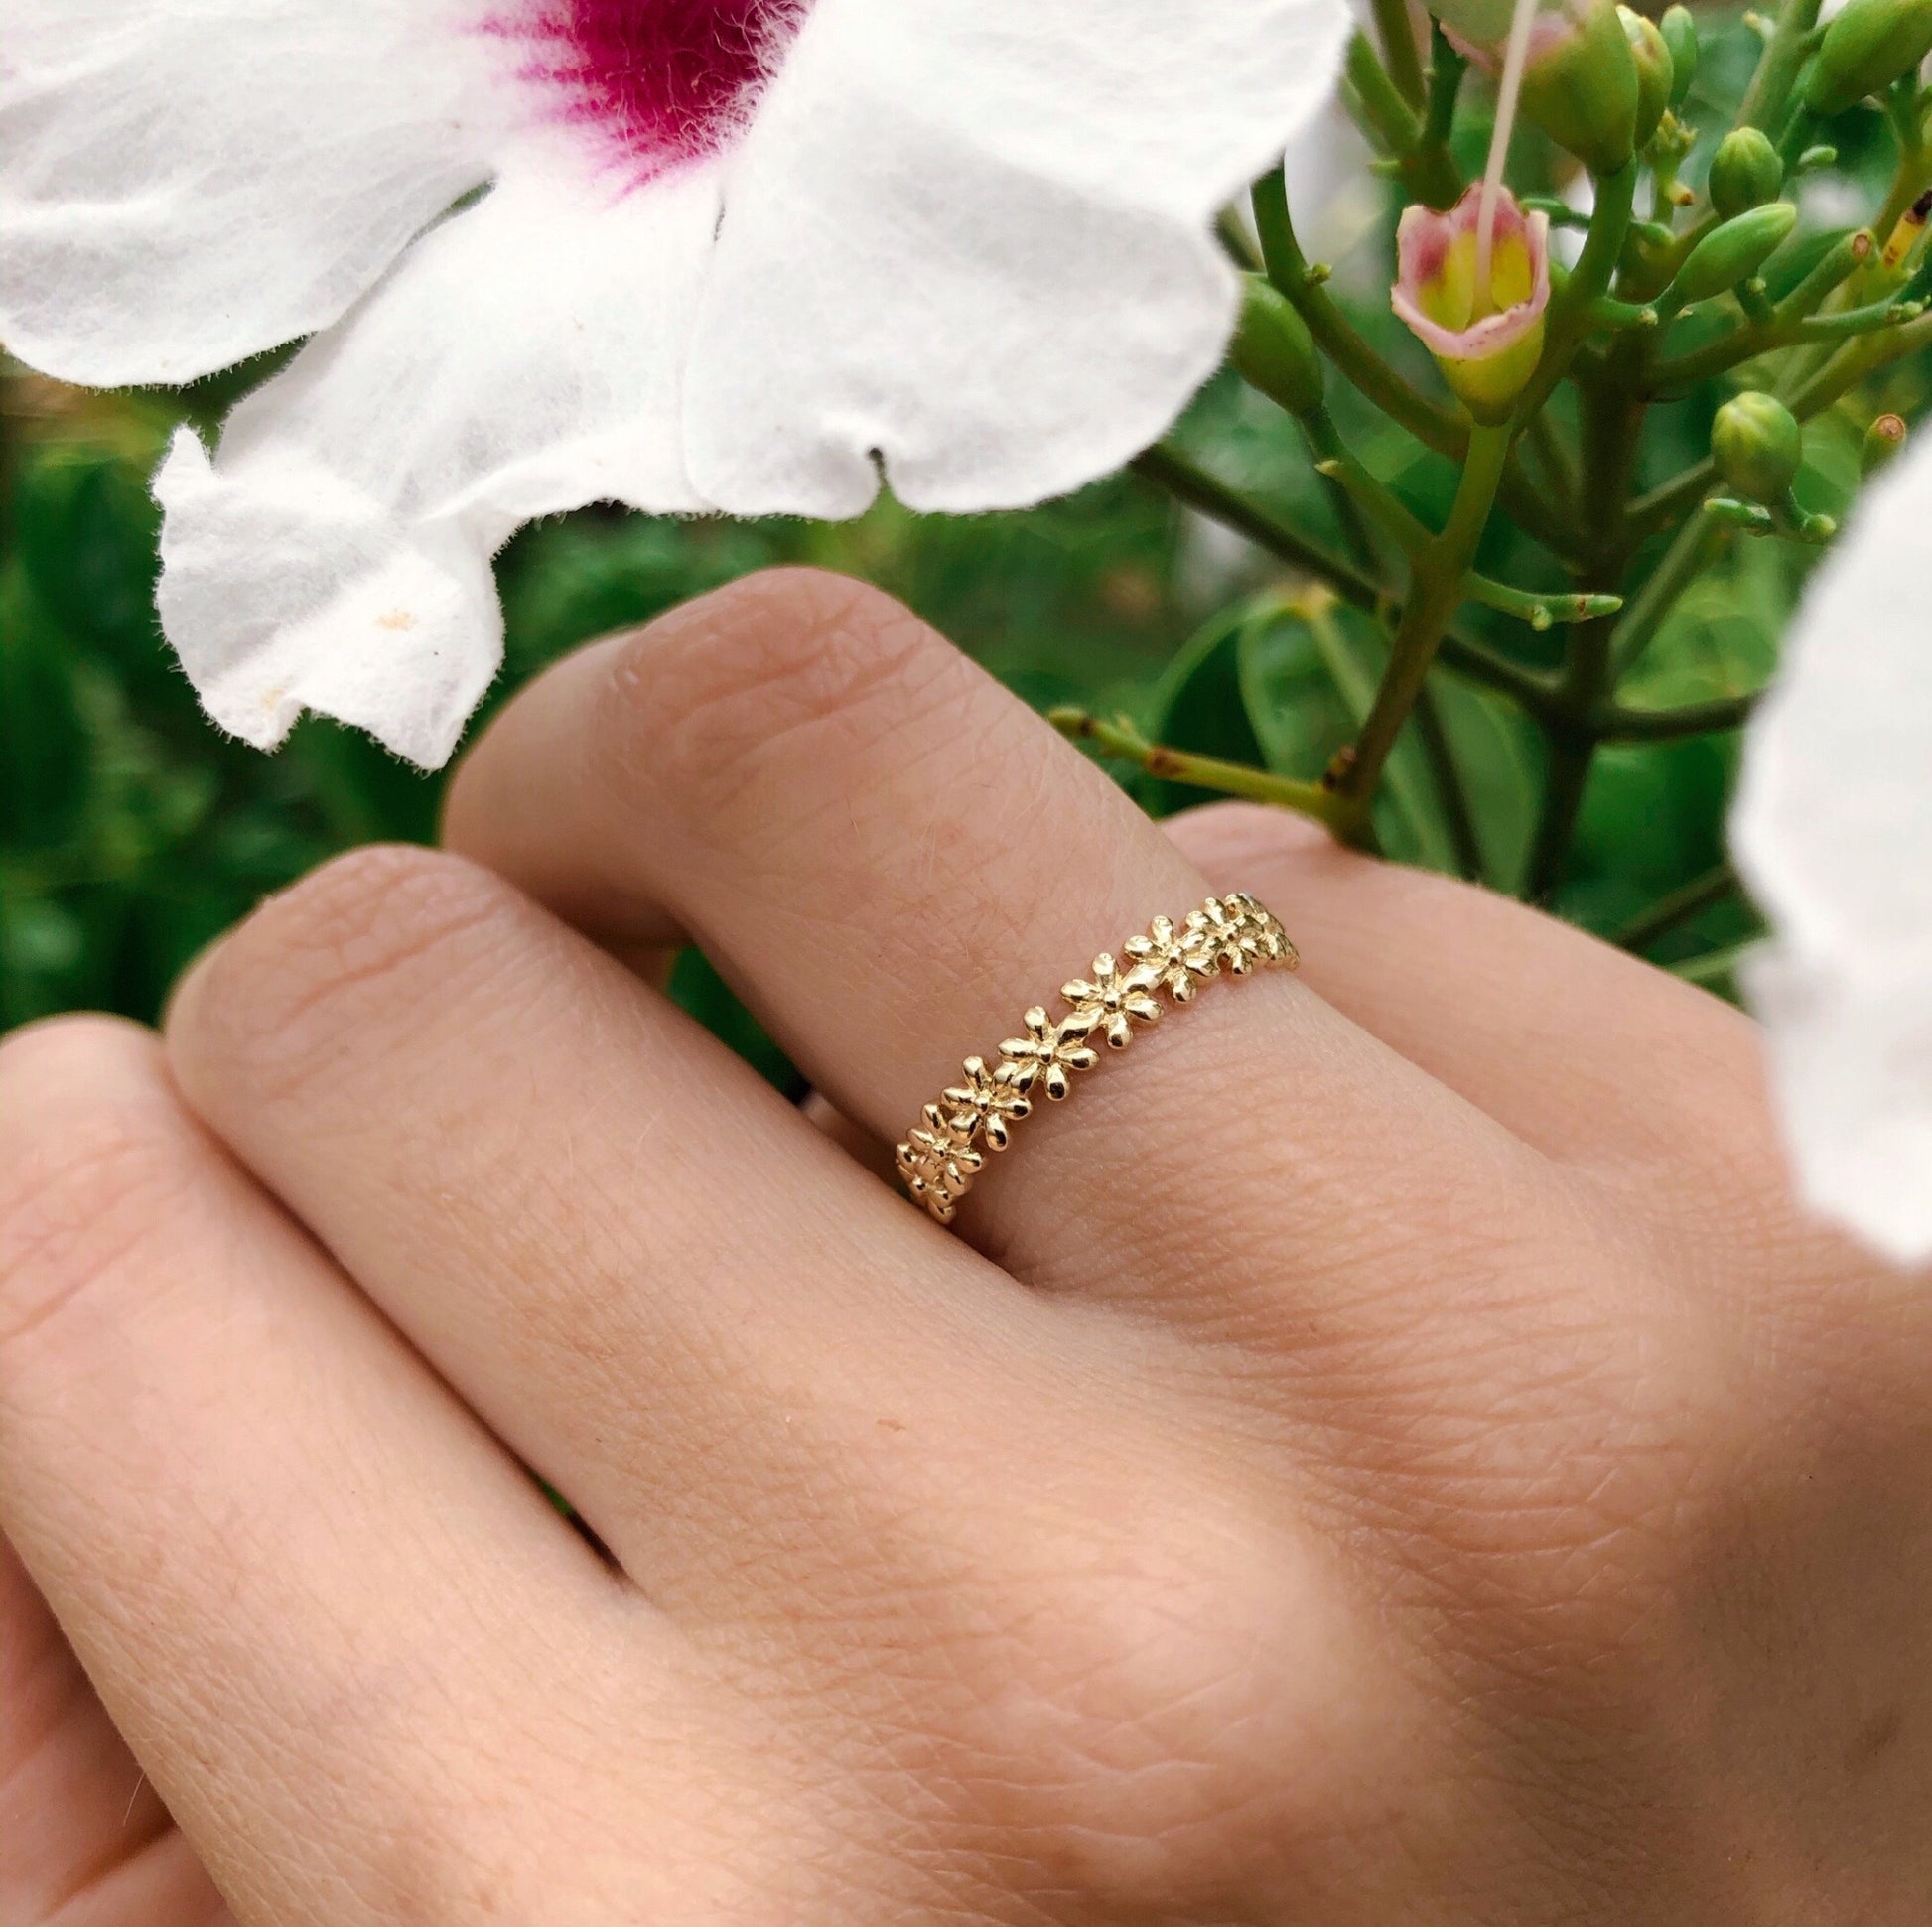 Solid gold ring with flower motif, displayed on hand